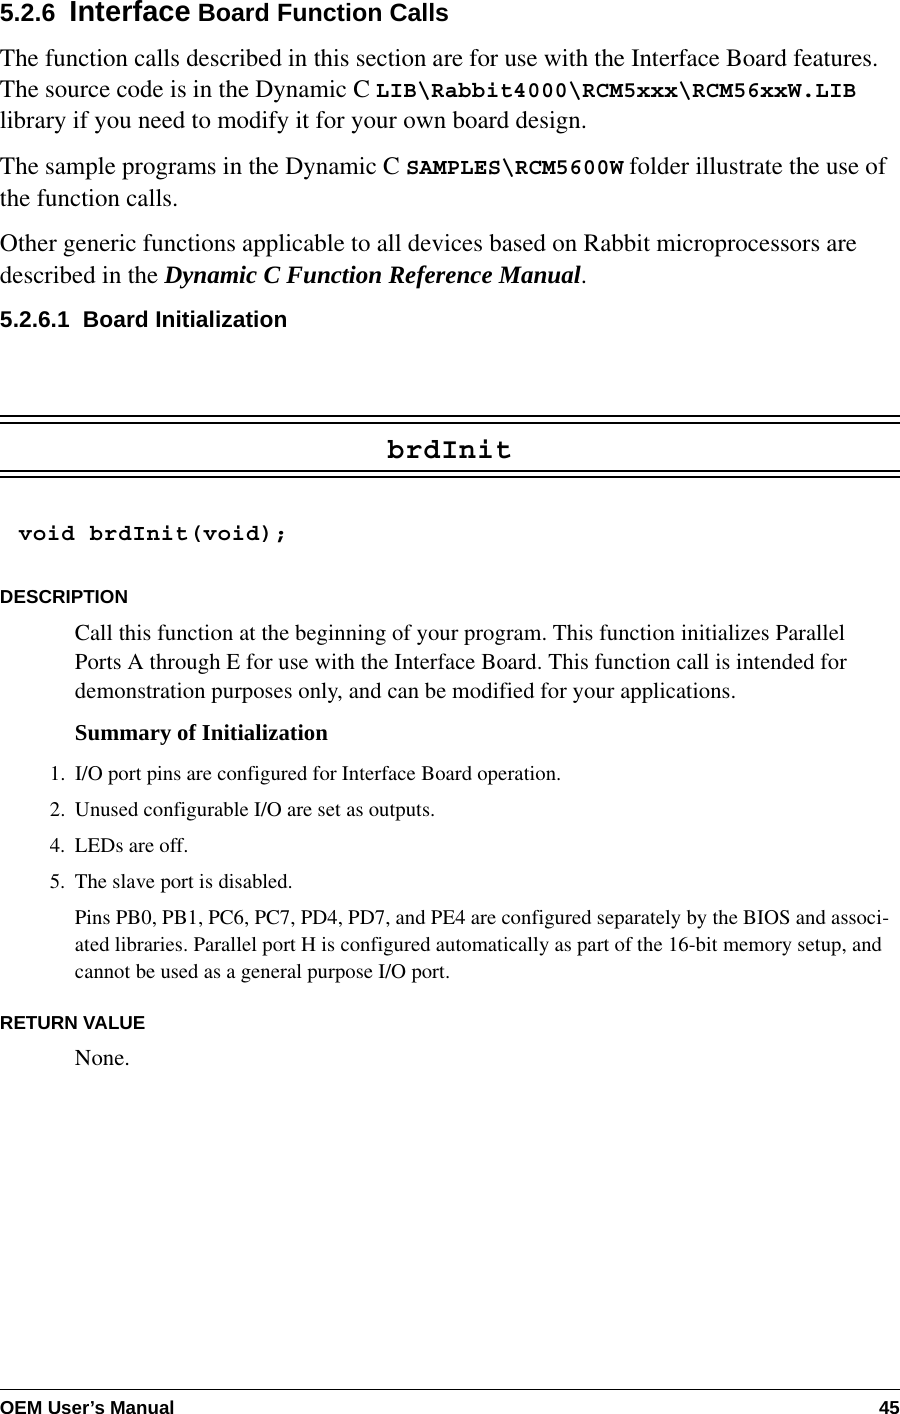 OEM User’s Manual 455.2.6  Interface Board Function CallsThe function calls described in this section are for use with the Interface Board features. The source code is in the Dynamic C LIB\Rabbit4000\RCM5xxx\RCM56xxW.LIB library if you need to modify it for your own board design.The sample programs in the Dynamic C SAMPLES\RCM5600W folder illustrate the use of the function calls.Other generic functions applicable to all devices based on Rabbit microprocessors are described in the Dynamic C Function Reference Manual.5.2.6.1  Board InitializationbrdInitvoid brdInit(void);DESCRIPTIONCall this function at the beginning of your program. This function initializes Parallel Ports A through E for use with the Interface Board. This function call is intended for demonstration purposes only, and can be modified for your applications.Summary of Initialization1. I/O port pins are configured for Interface Board operation.2. Unused configurable I/O are set as outputs.4. LEDs are off.5. The slave port is disabled.Pins PB0, PB1, PC6, PC7, PD4, PD7, and PE4 are configured separately by the BIOS and associ-ated libraries. Parallel port H is configured automatically as part of the 16-bit memory setup, and cannot be used as a general purpose I/O port.RETURN VALUENone.